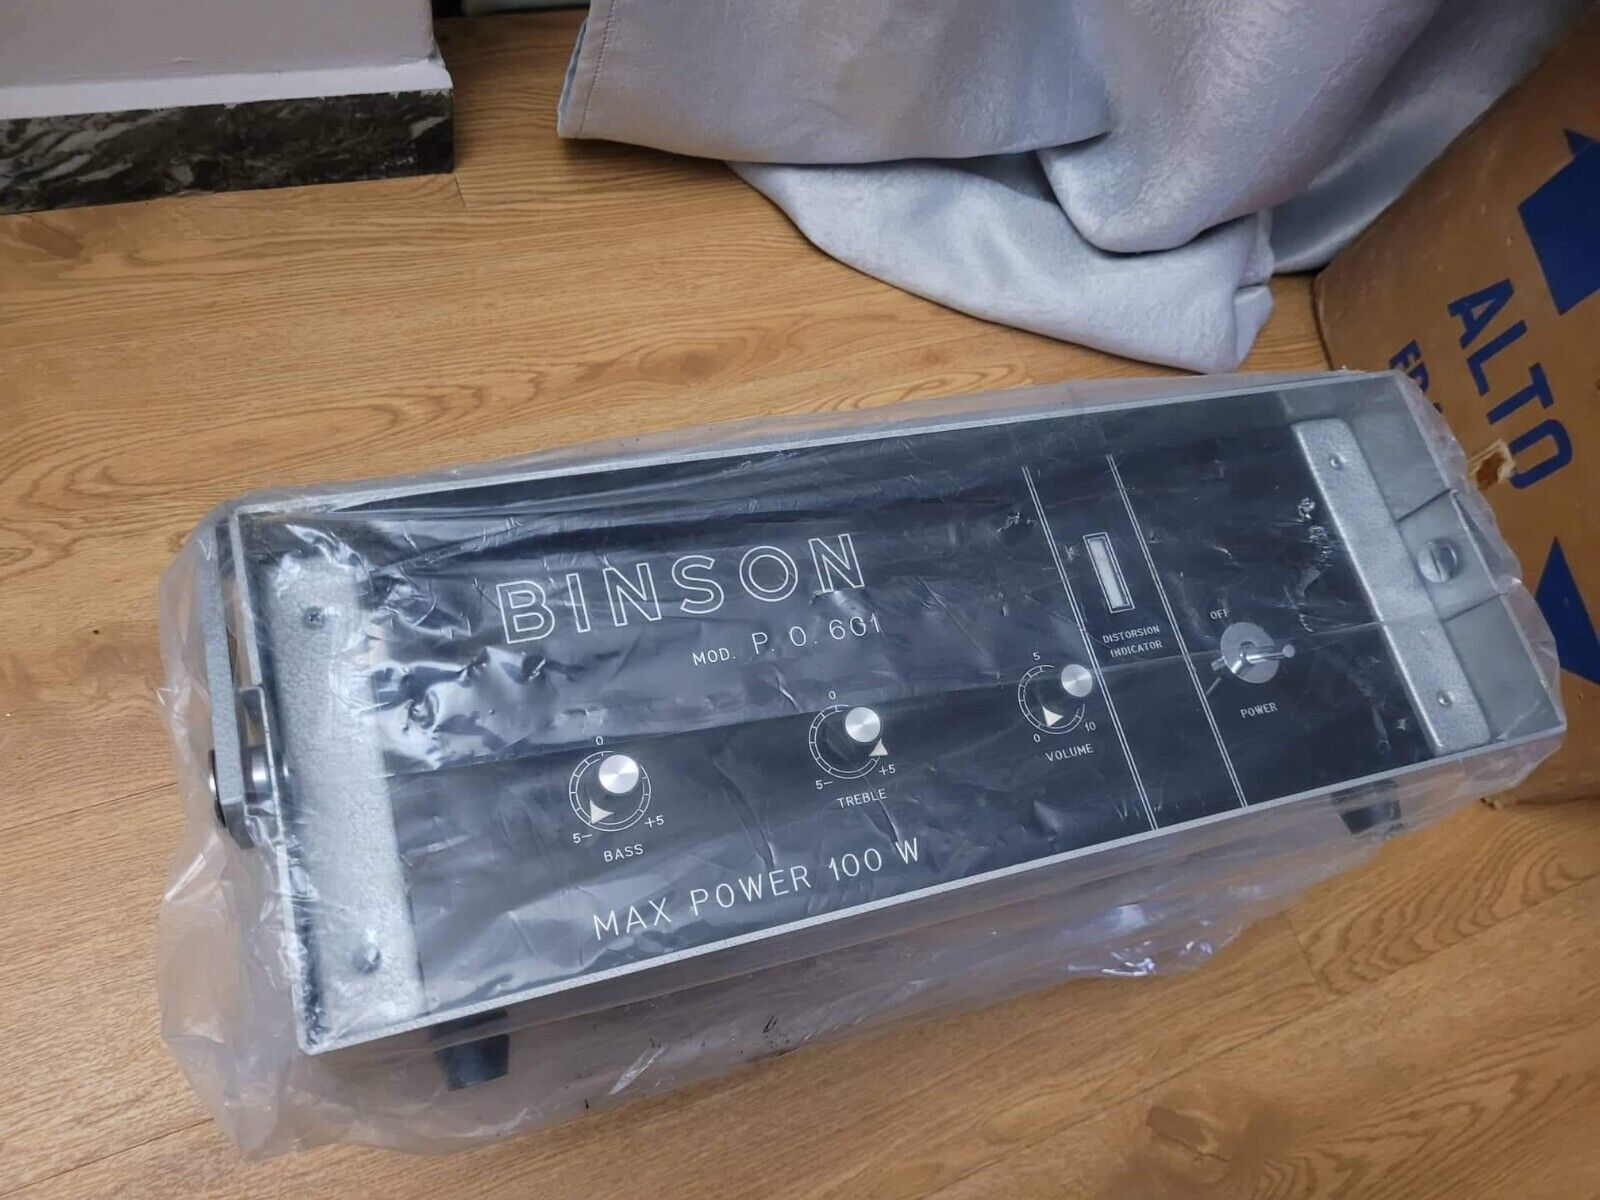 Binson P.O. 601 100W Max Power Vintage Amplifier 1968 NEW OLD STOCK ITALY